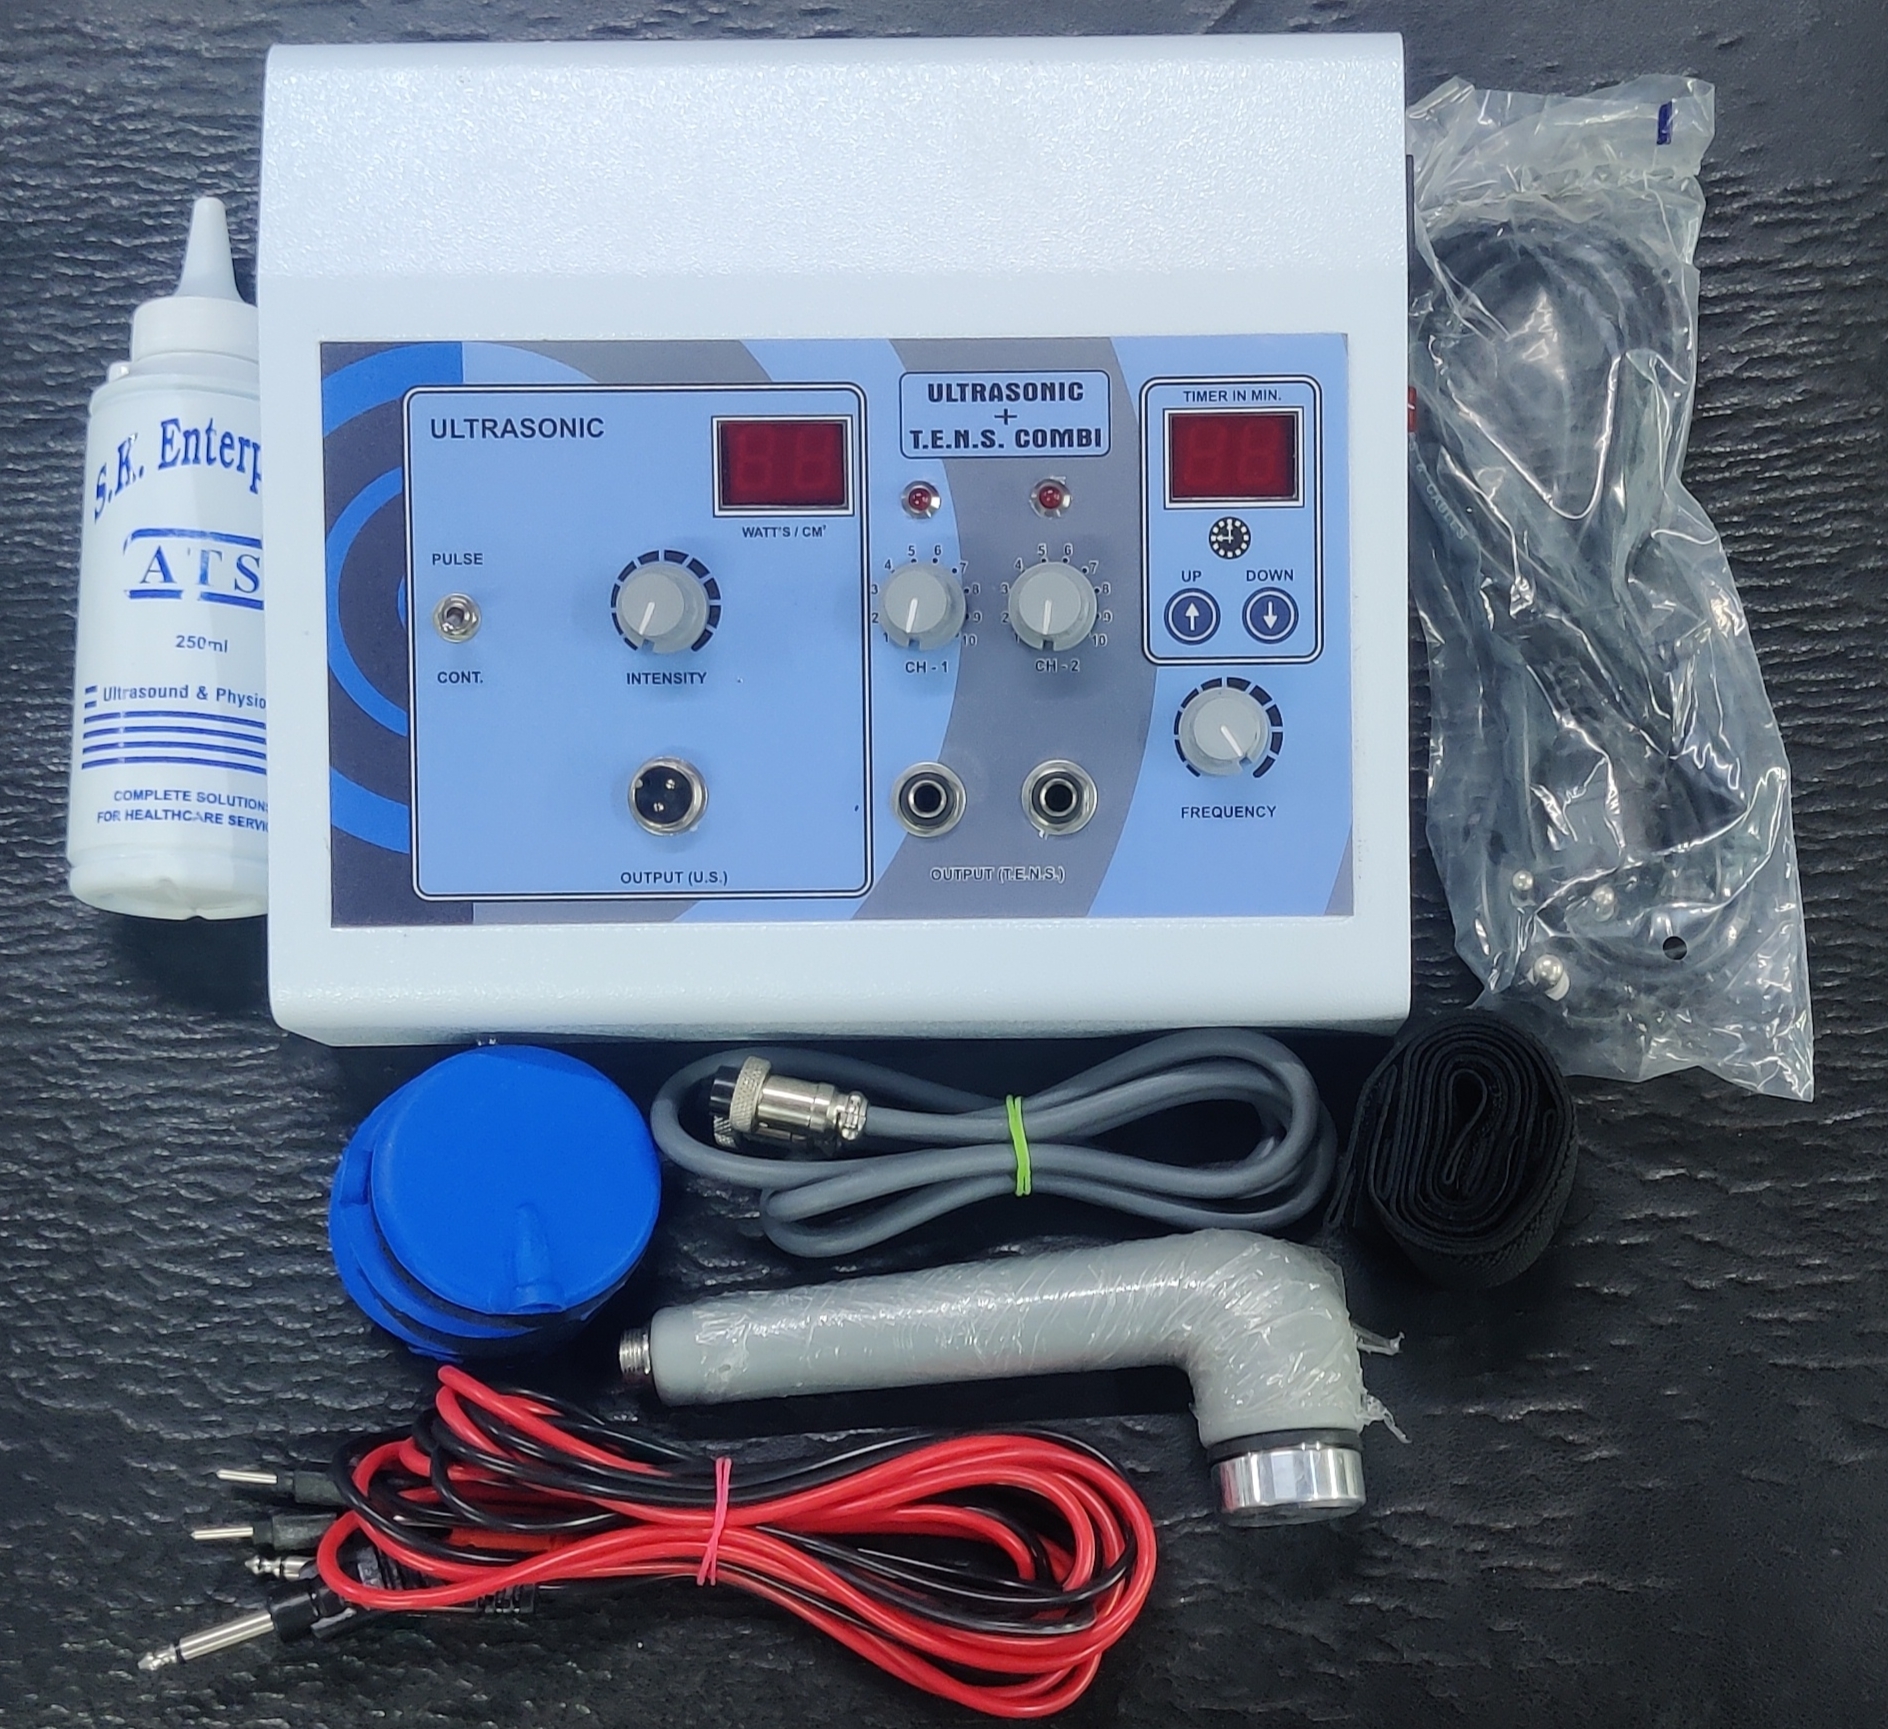 Ultrasonic with 2 channel TENS Combo Machine